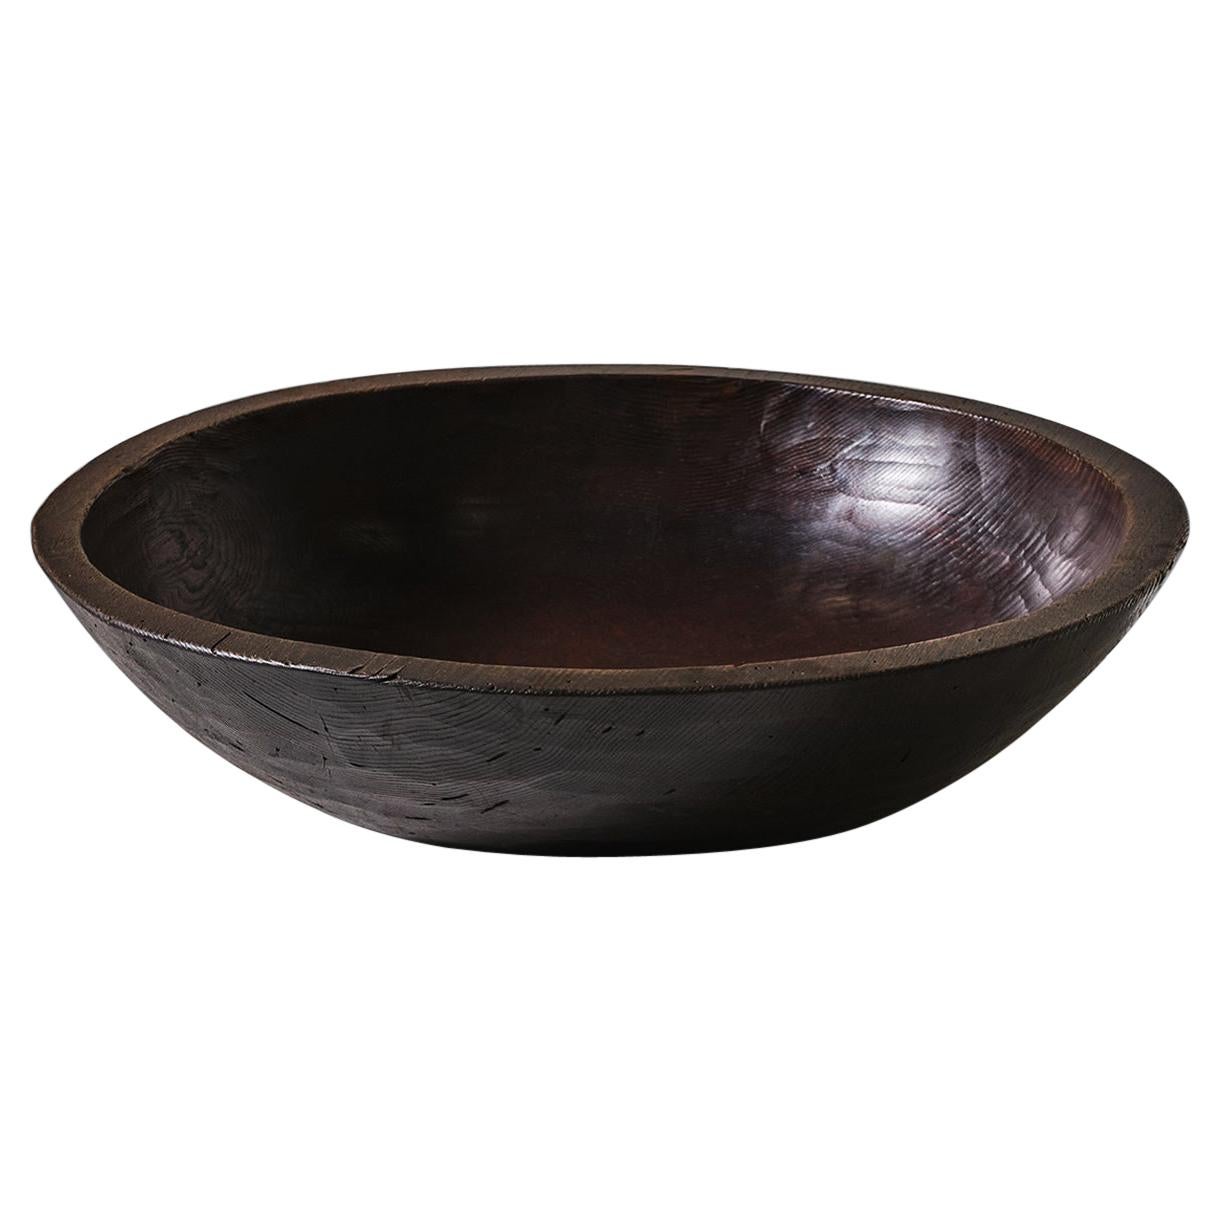 Japanese Elm Wooden Bowl, Early 20th Century